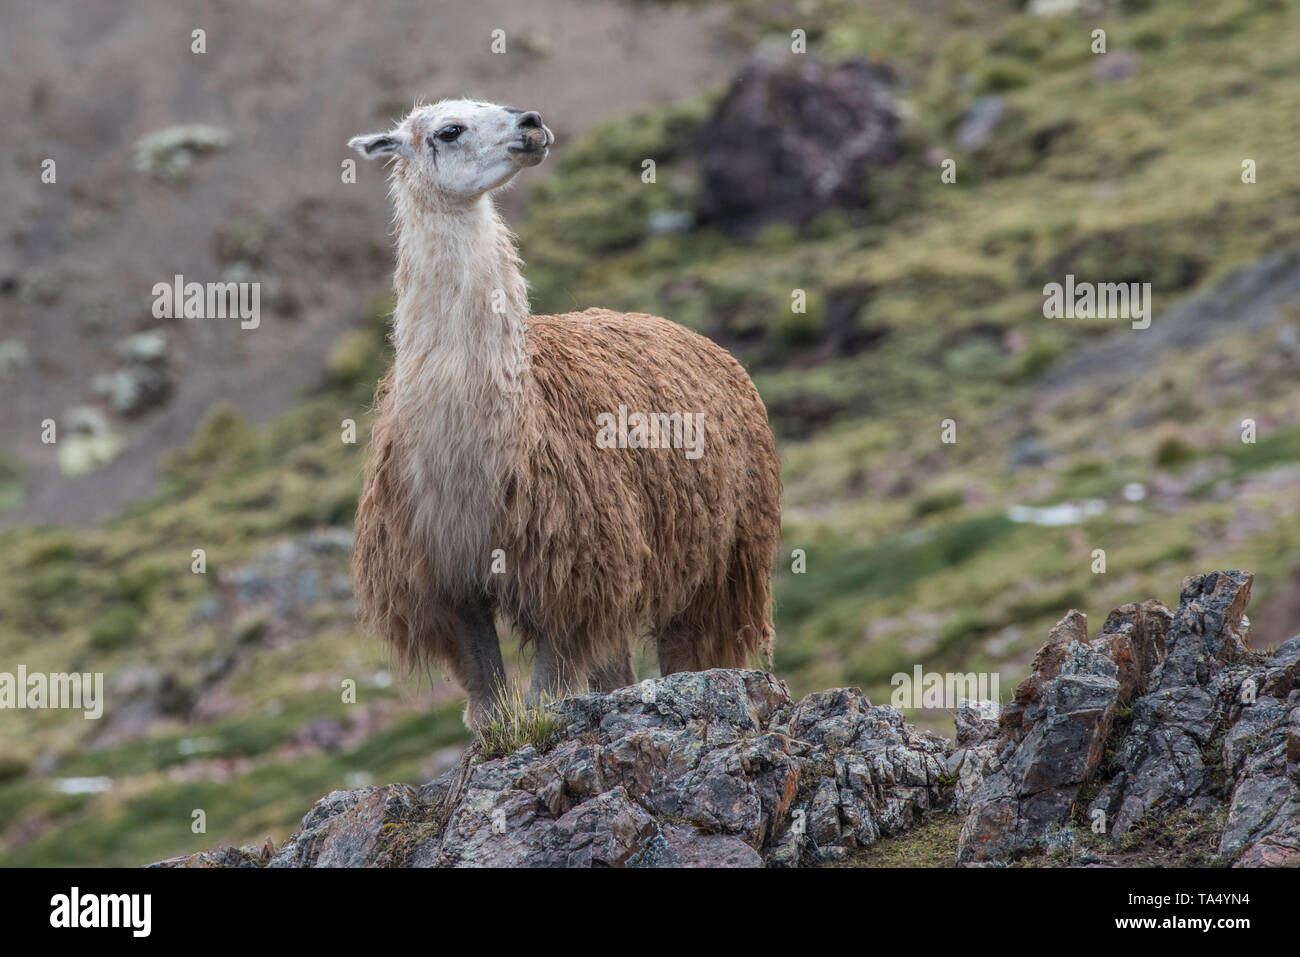 A domestic llama (Lama glama) from the puno of the high Andes in Southern Peru.  Their fur will be used to knit sweaters and hats. Stock Photo